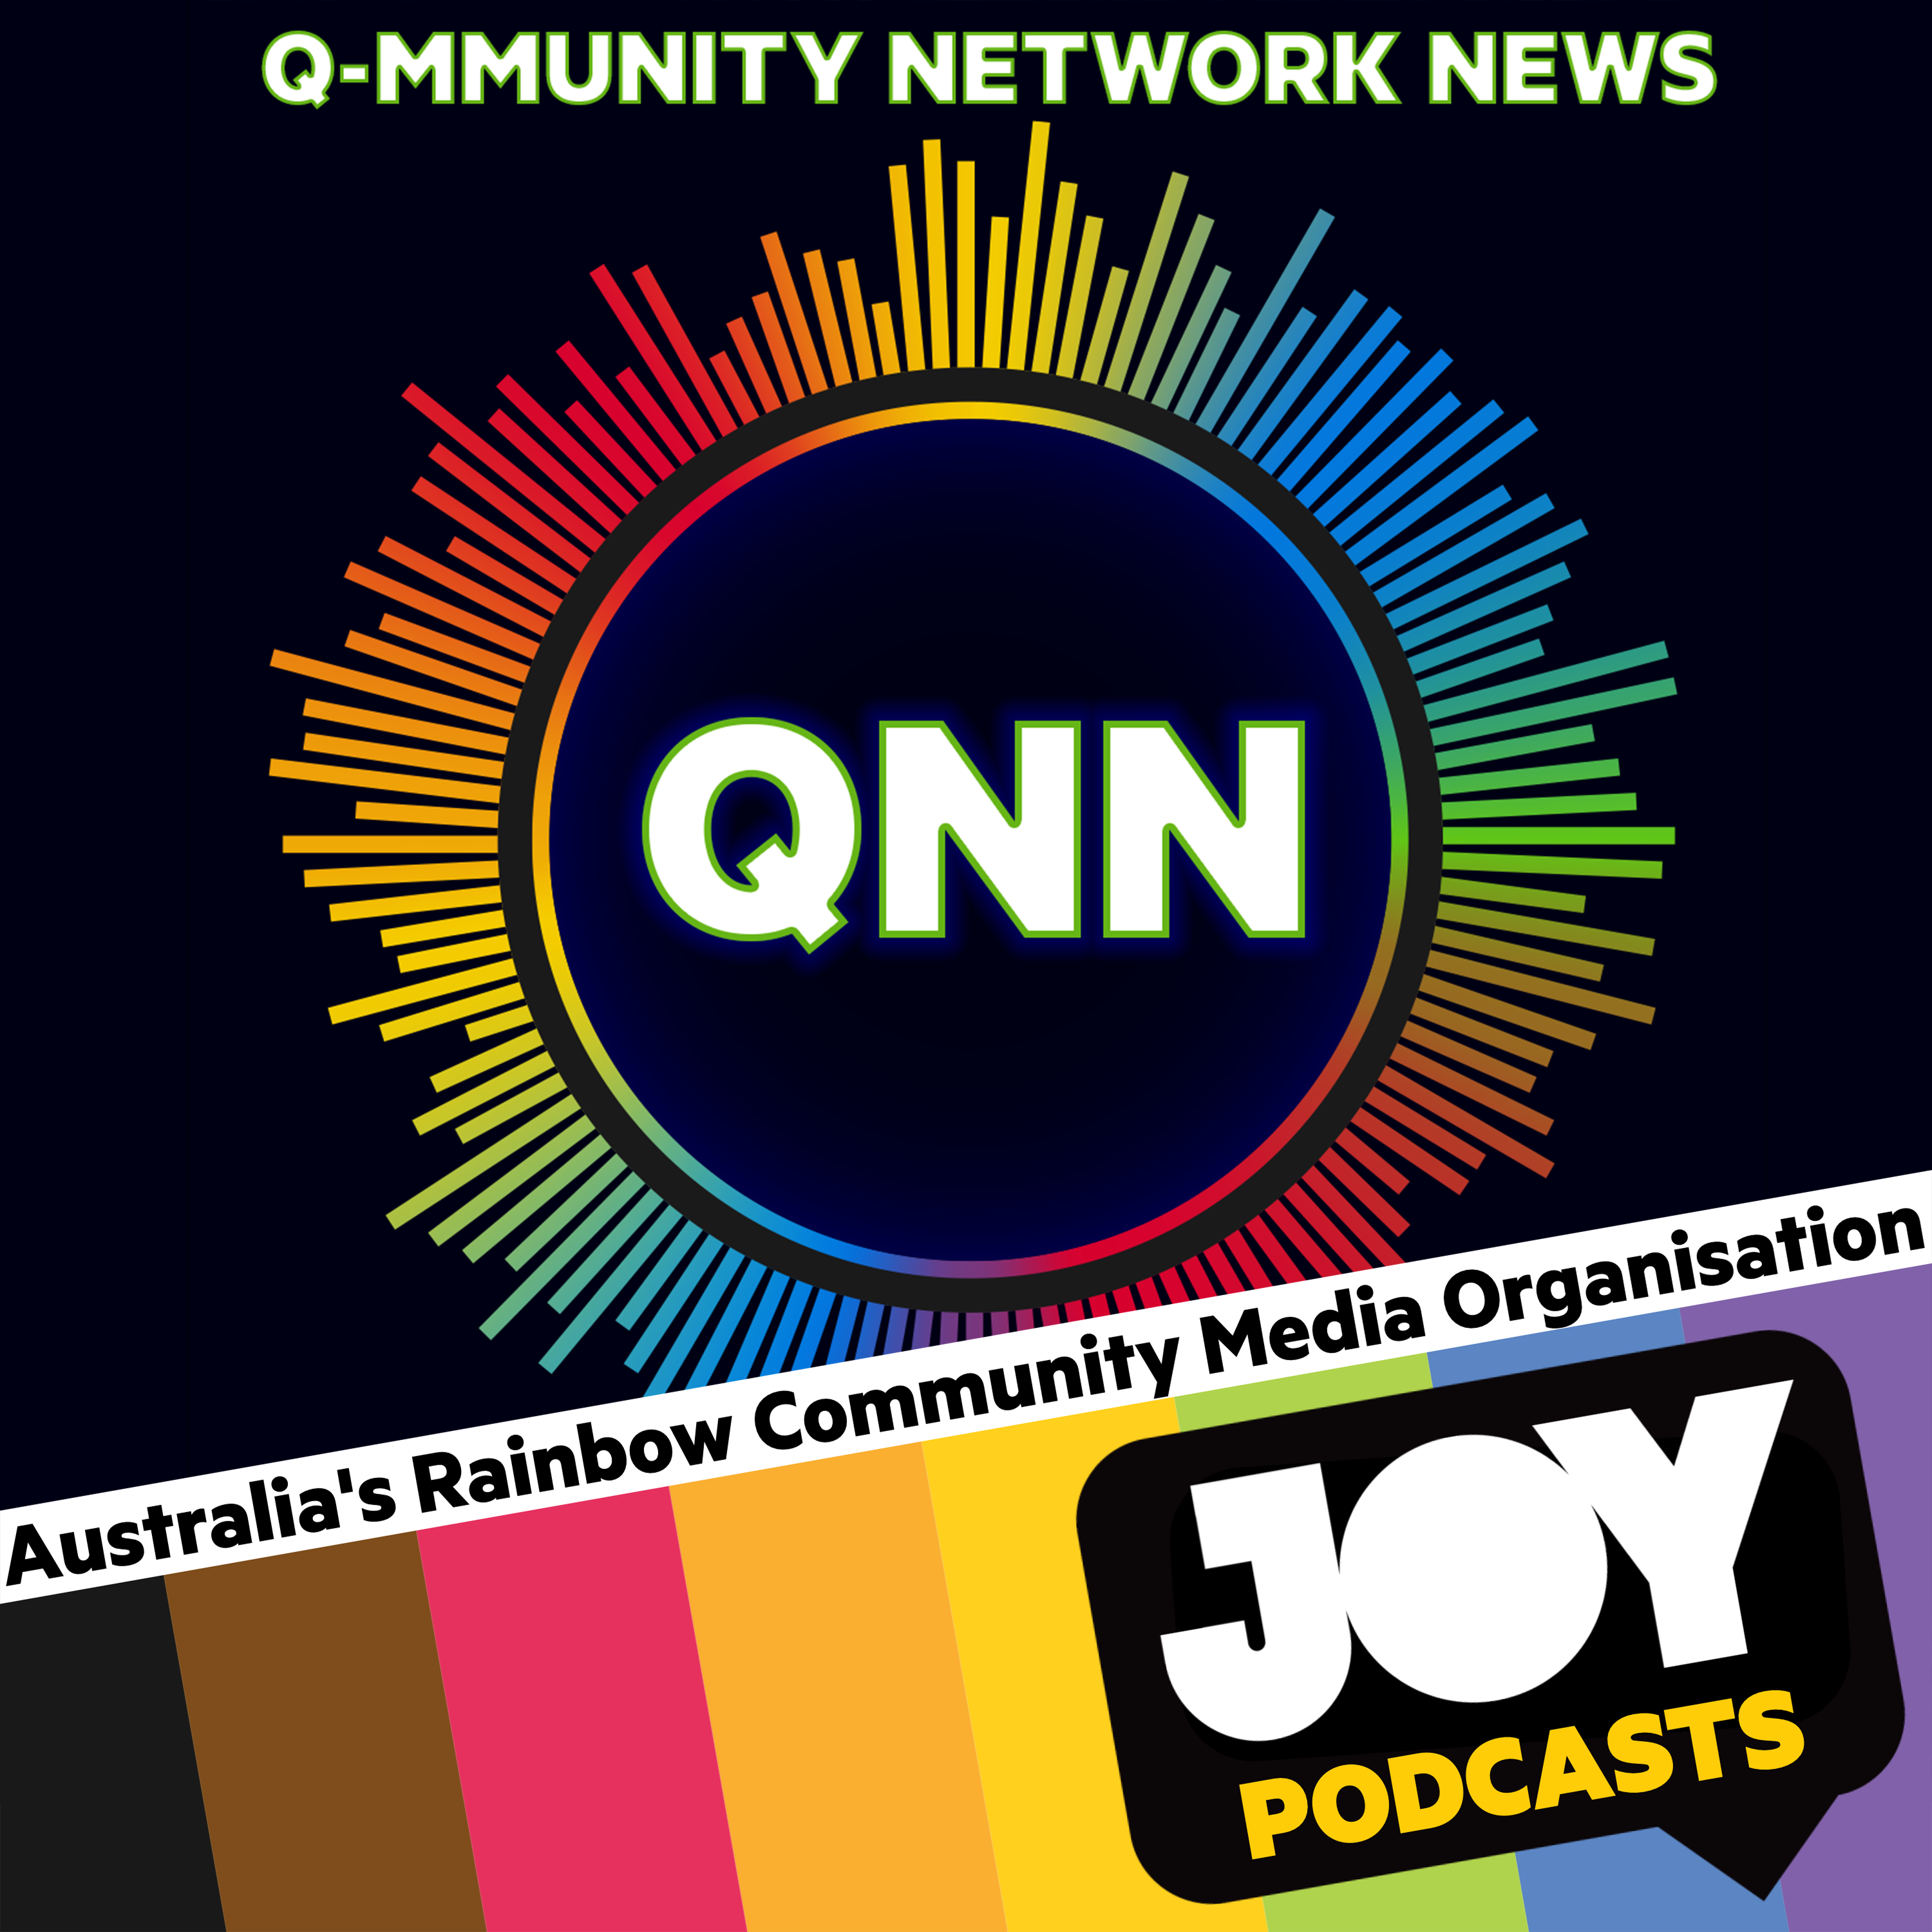 Q-mmunity Network News (QNN) – Queer Weekly News and Sport Bulletin